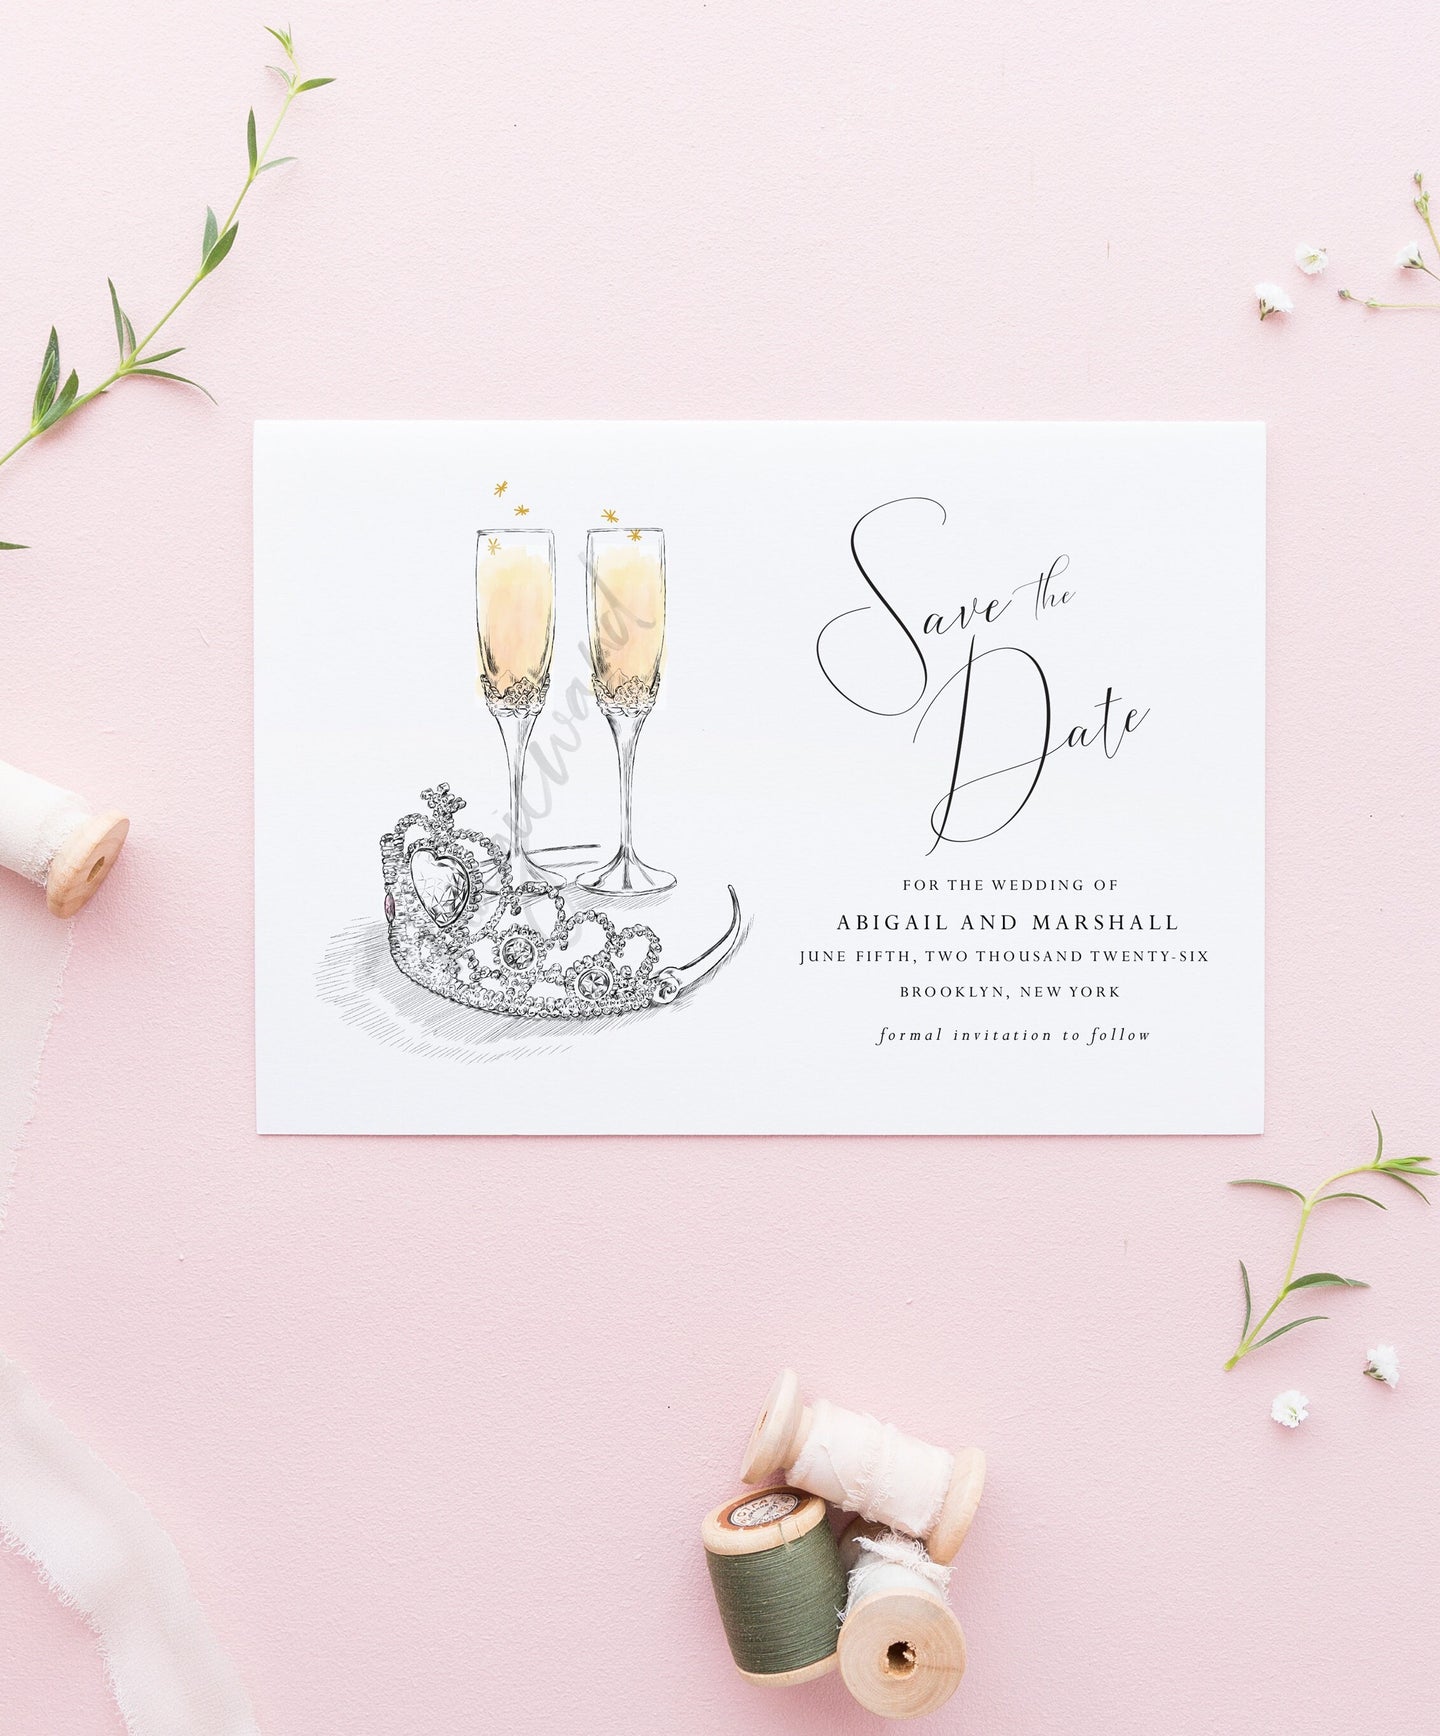 Tiara & Champagne Glasses, Fairytale Wedding, STD, Save the Dates, Disney, Crown, Champagne Glasses, Wedding, Save the Date Cards